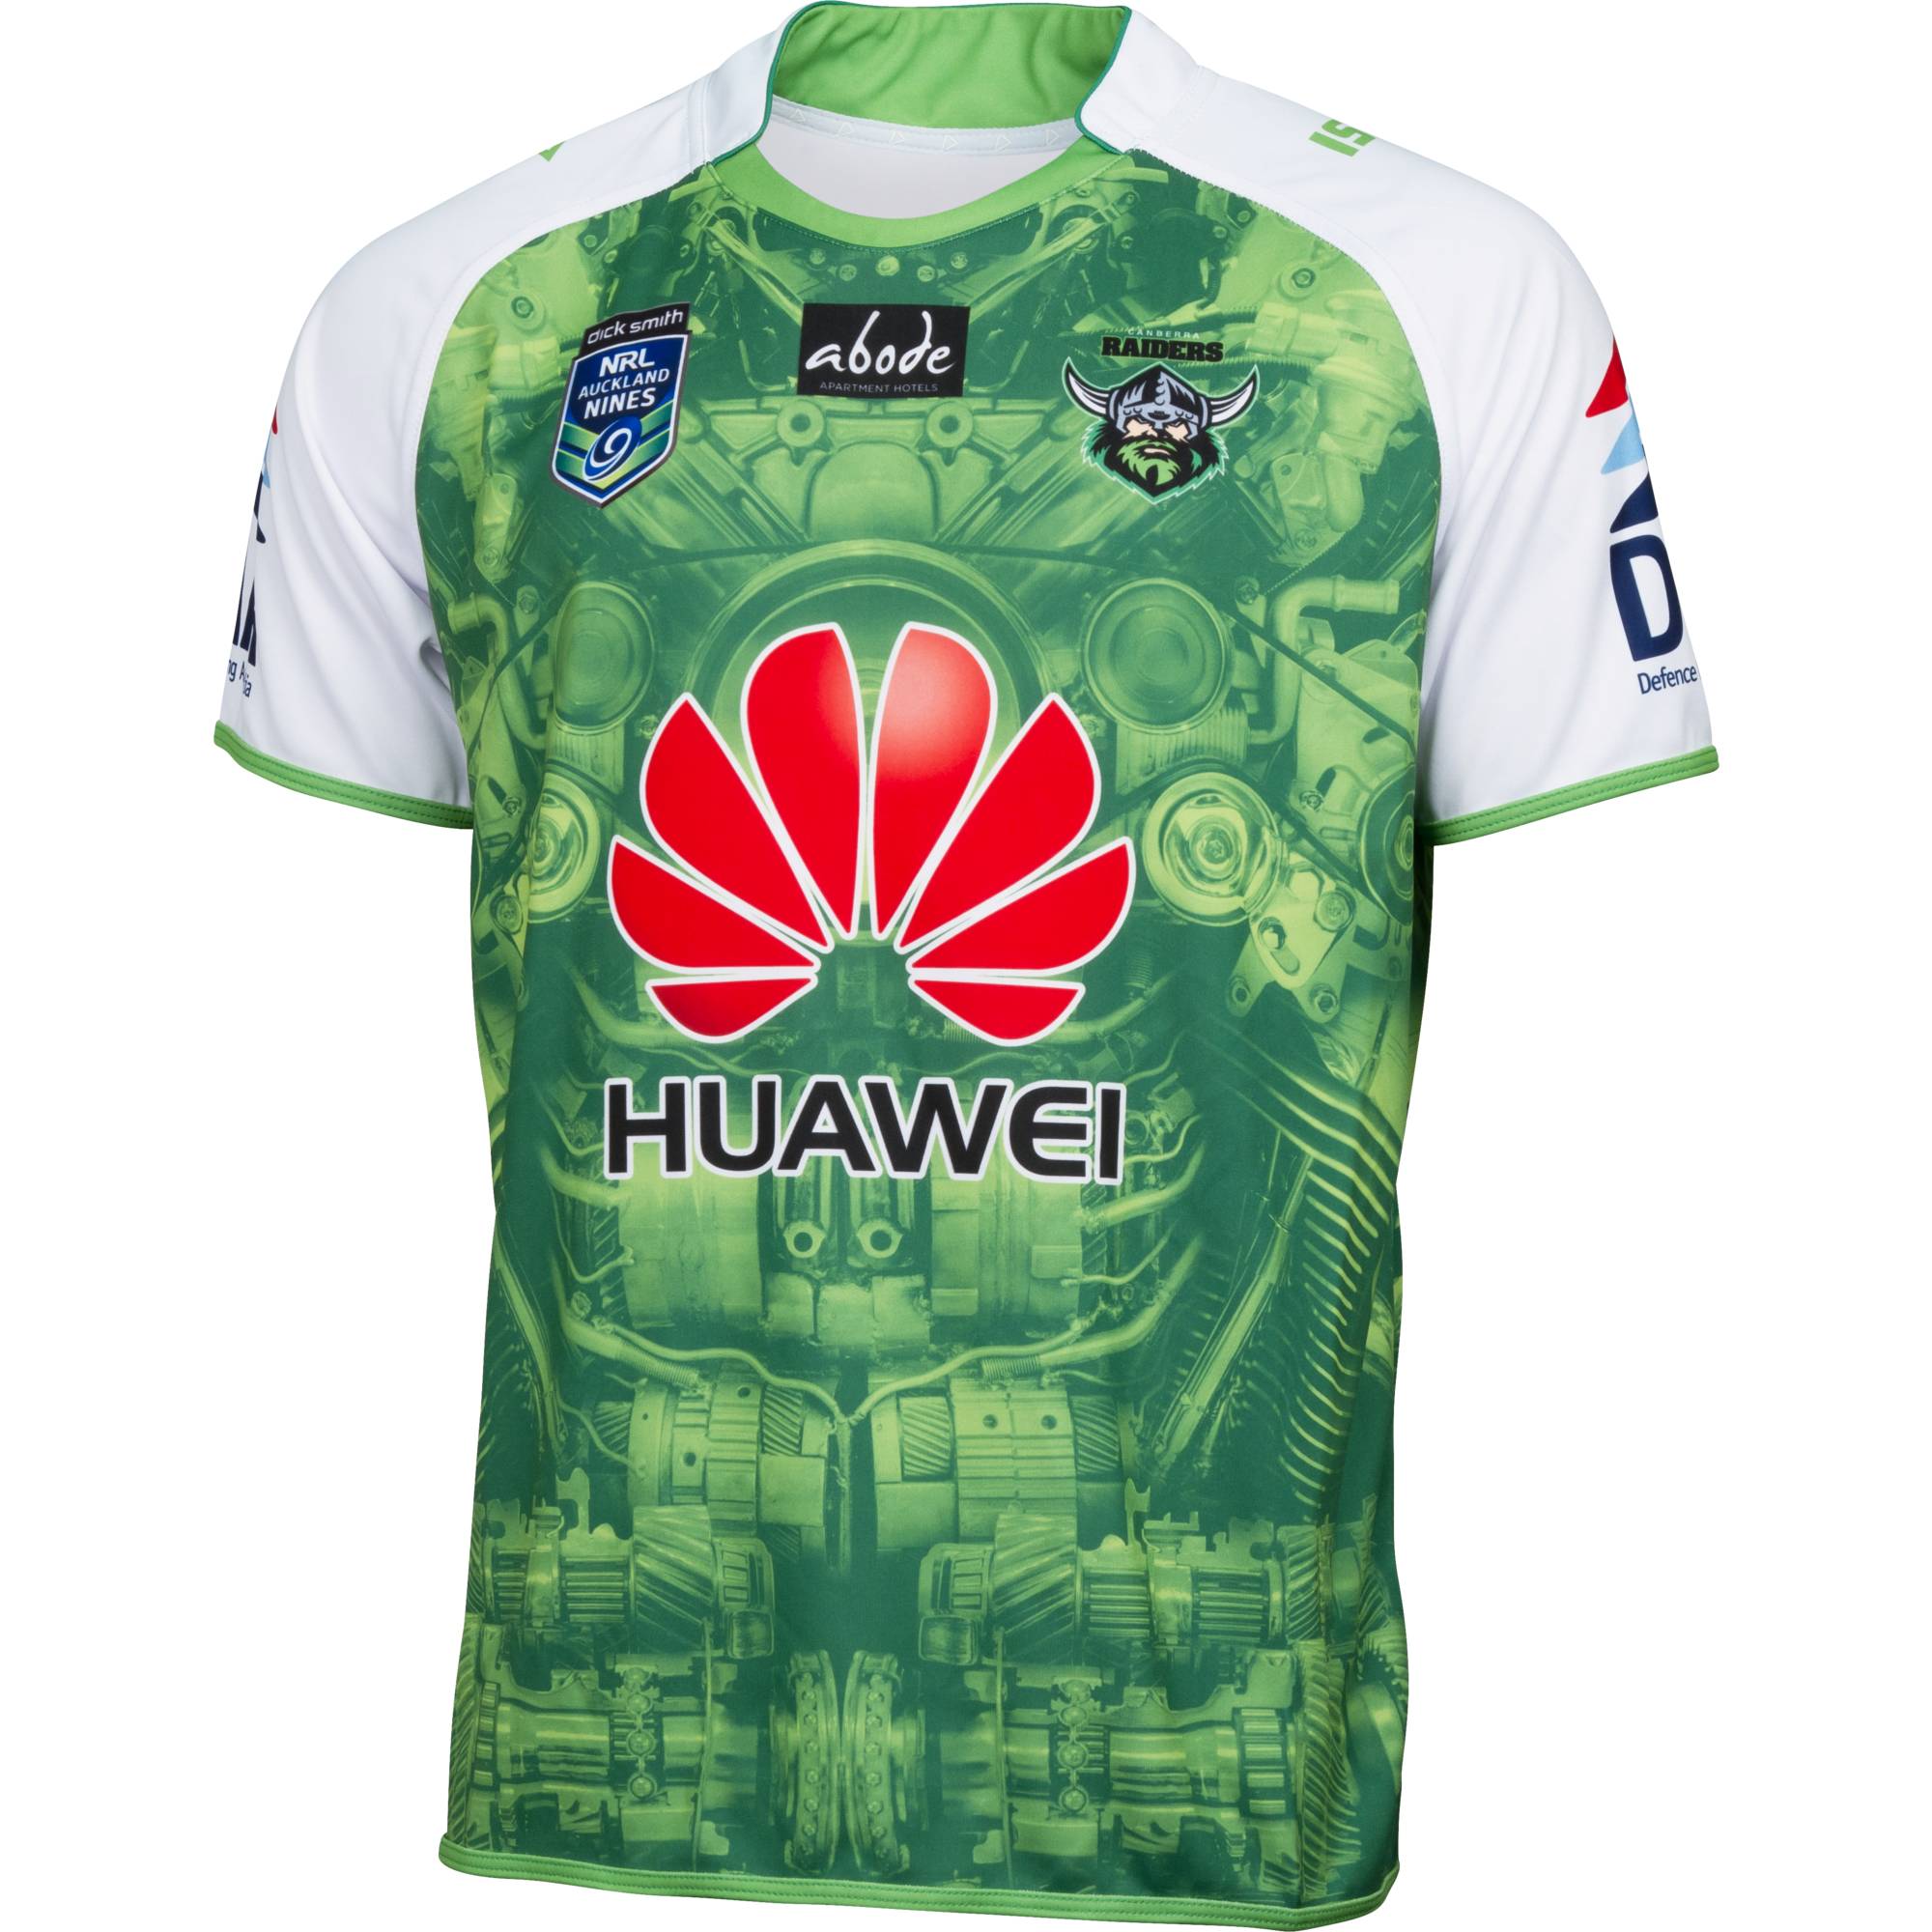 NRL Auckland Nines 2015 Shirt Round-up – Rugby Shirt Watch